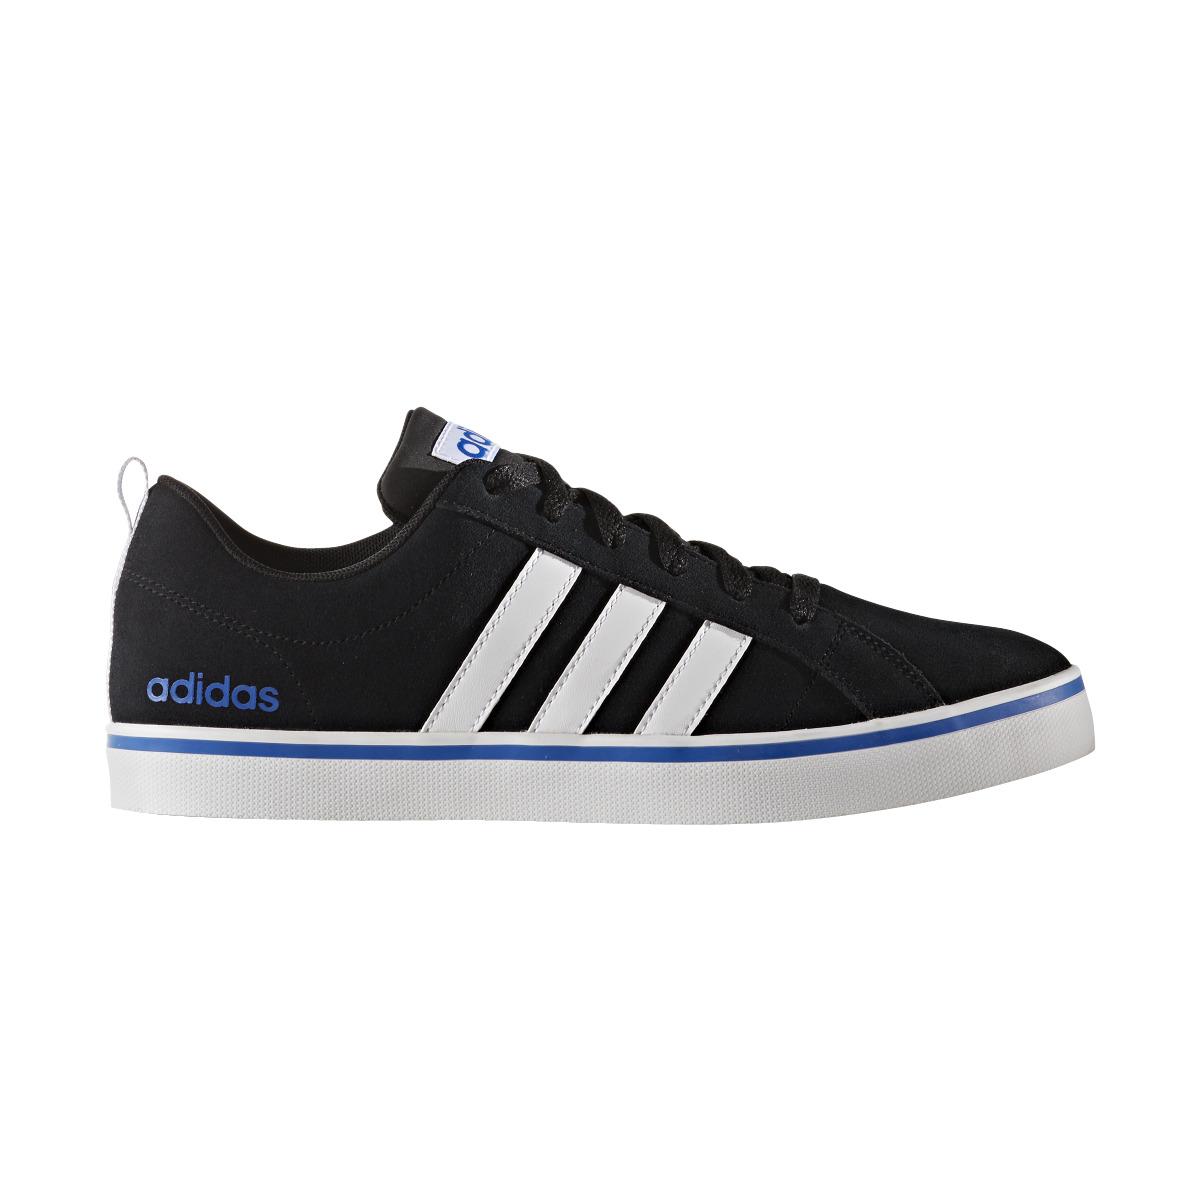 Lyst - Adidas Neo Pace Plus Casual Trainers in Black for Men